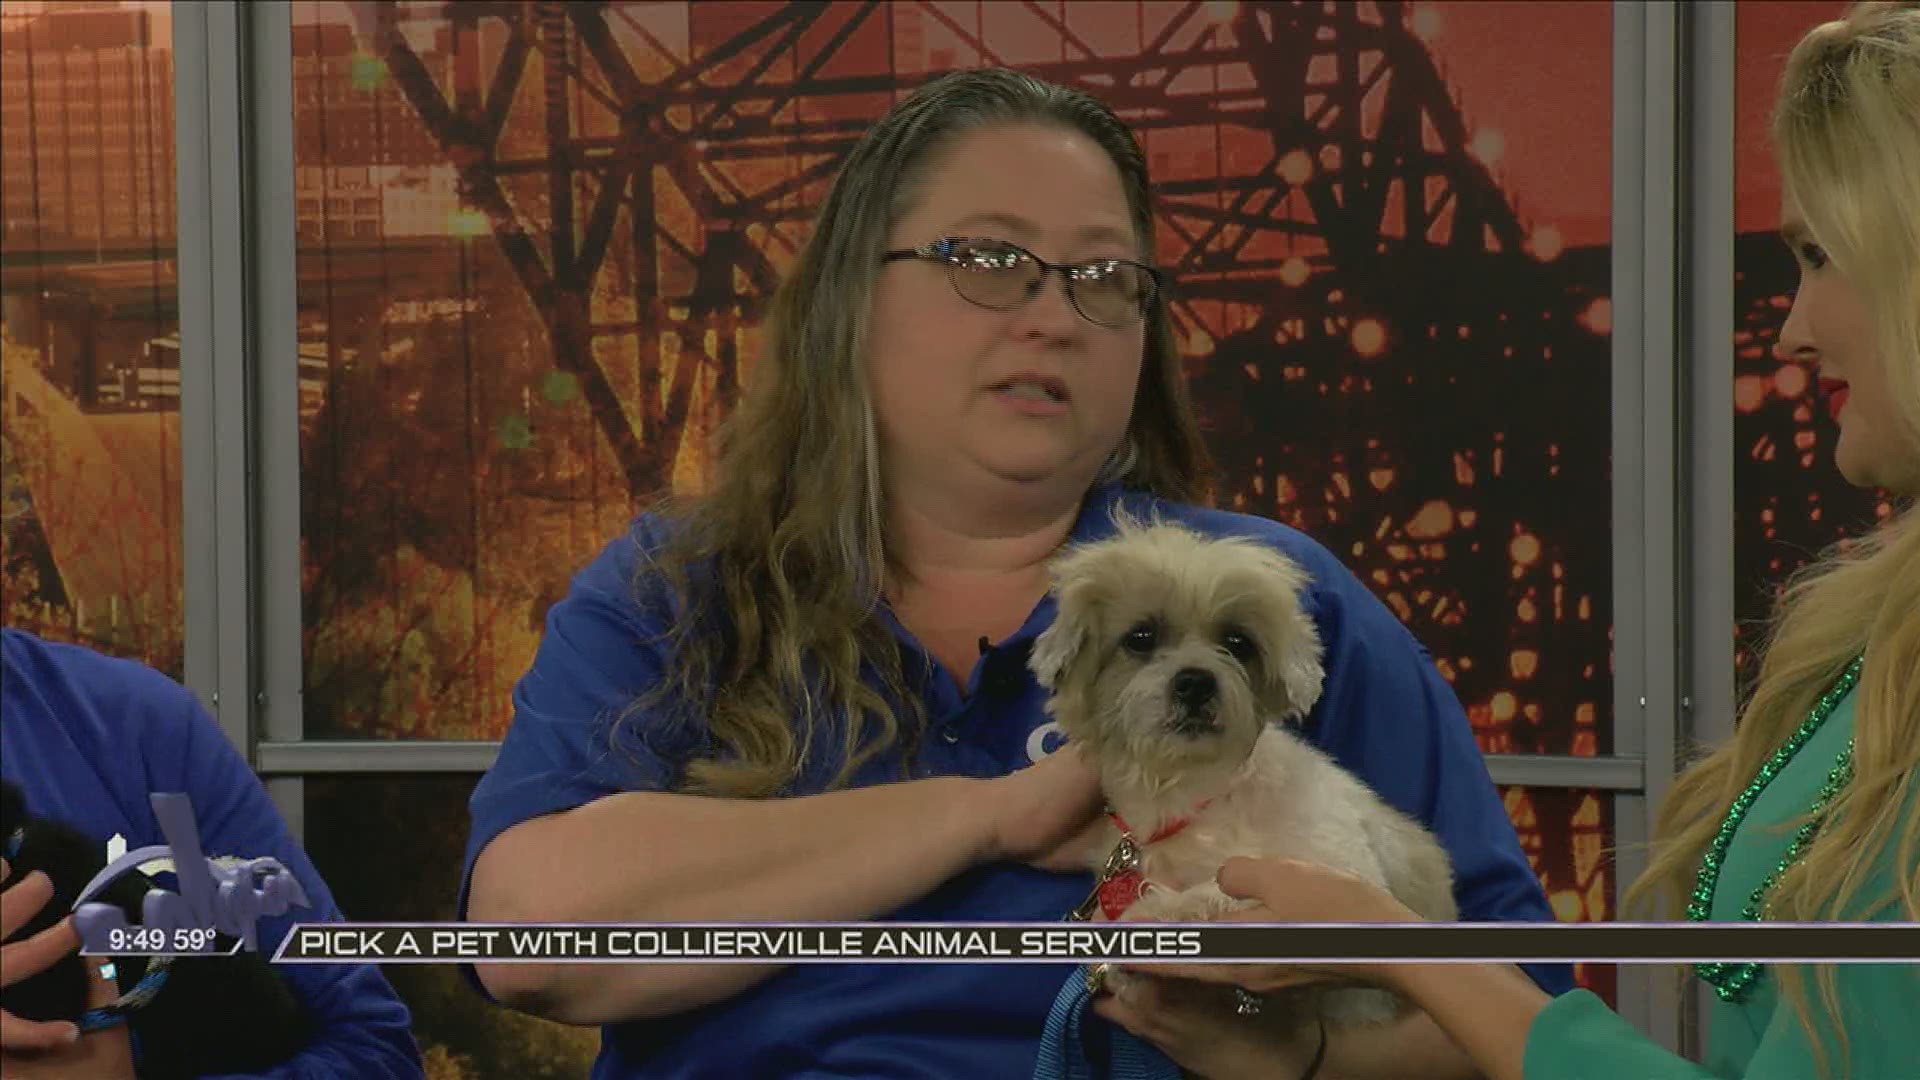 Adopt a pet from Collierville Animal Services